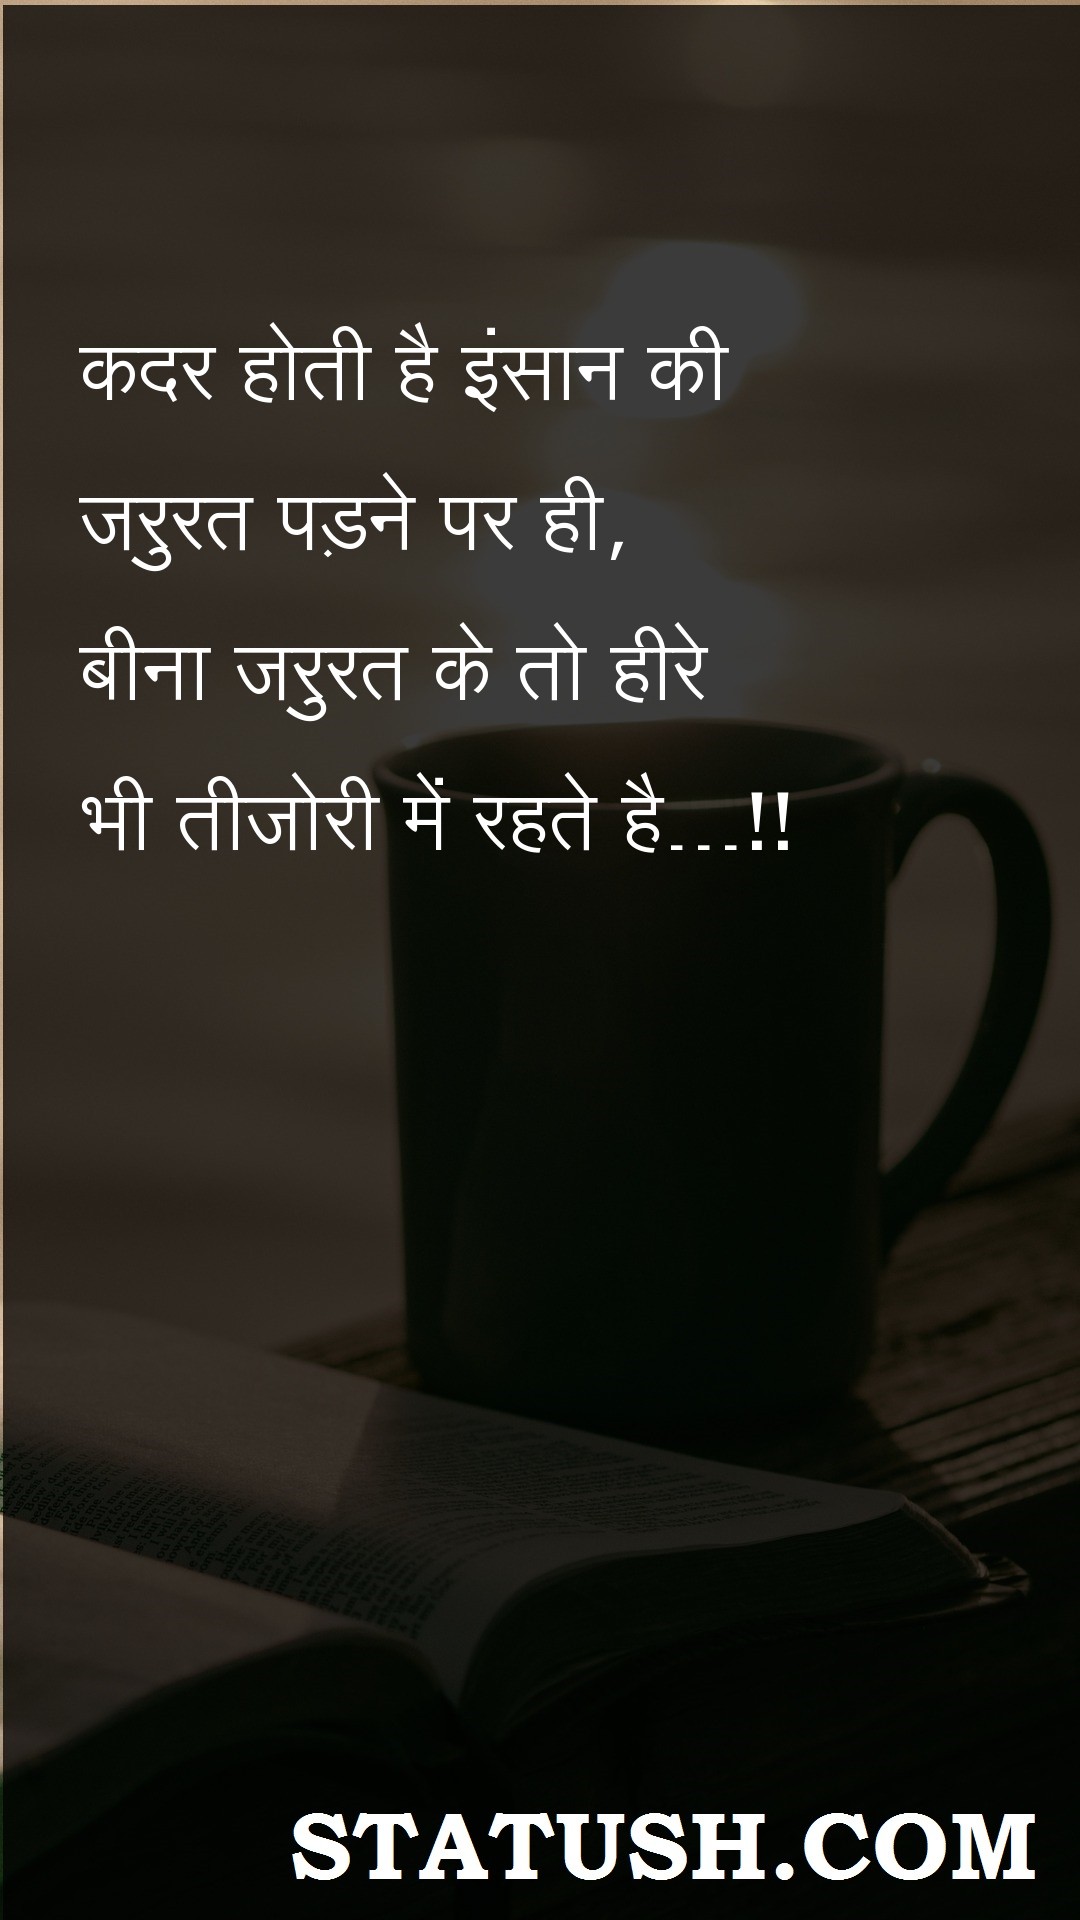 It is so important that - Hindi Quotes at statush.com